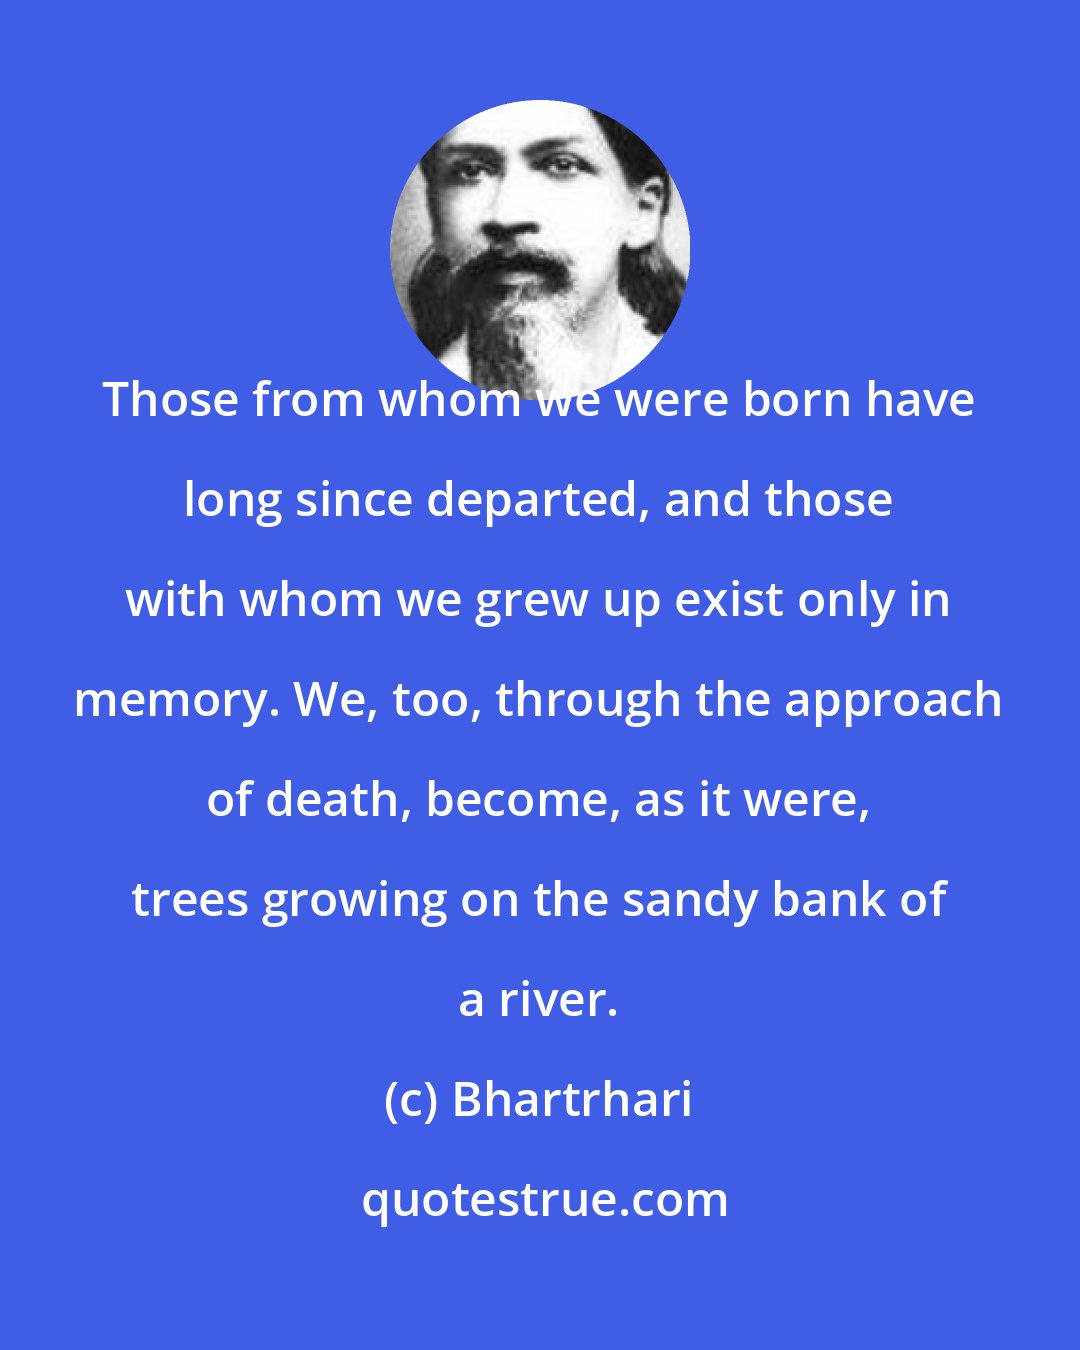 Bhartrhari: Those from whom we were born have long since departed, and those with whom we grew up exist only in memory. We, too, through the approach of death, become, as it were, trees growing on the sandy bank of a river.